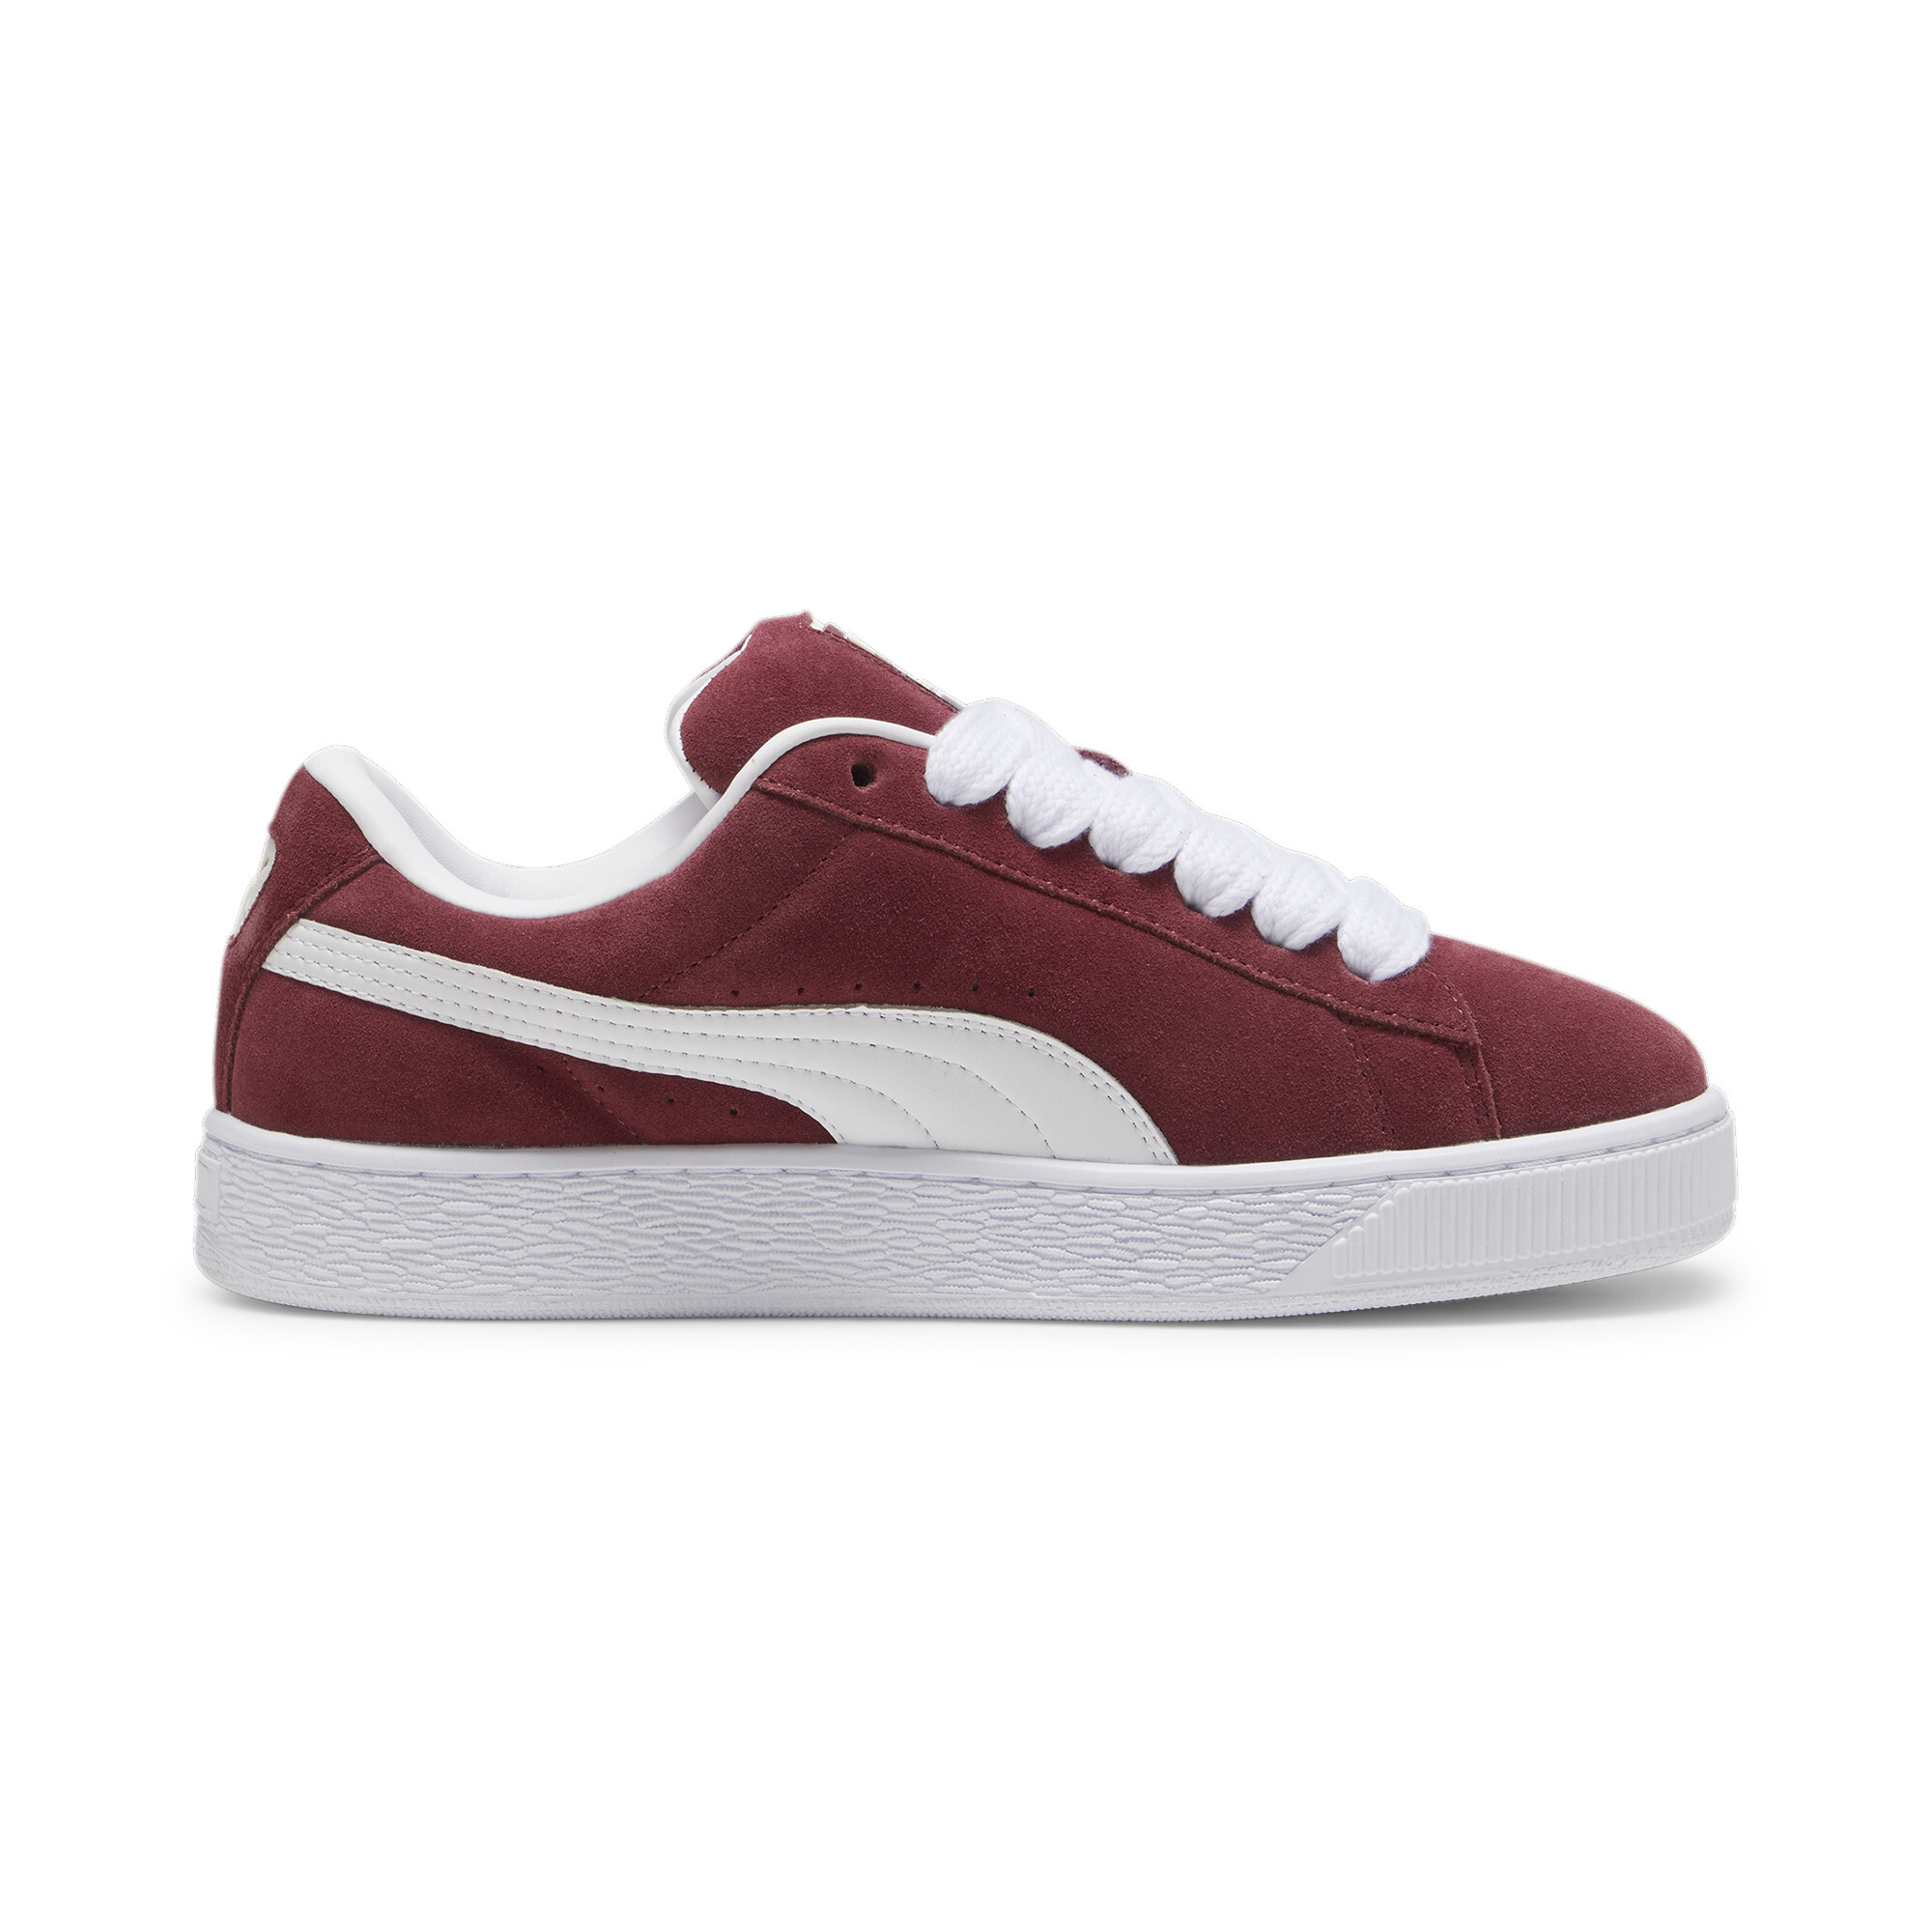 Puma Suede XL Sneakers Unisex, Red, Size 47, Shoes